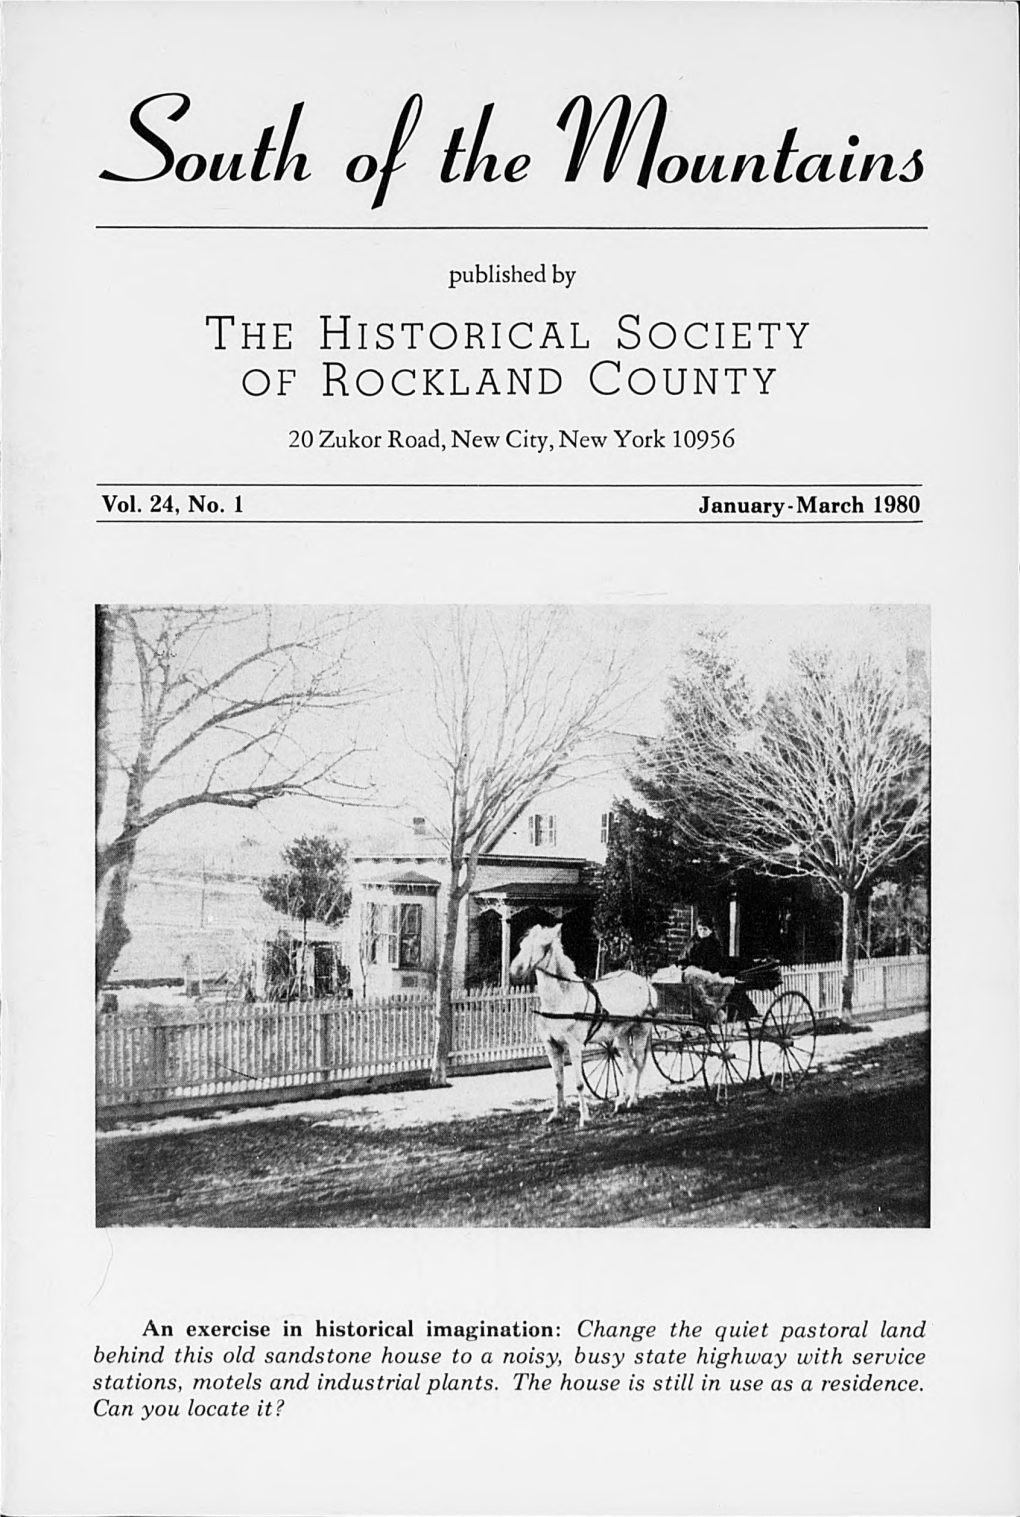 The Historical Society of Rockland County 20 Zukor Road, New City, New York 10956